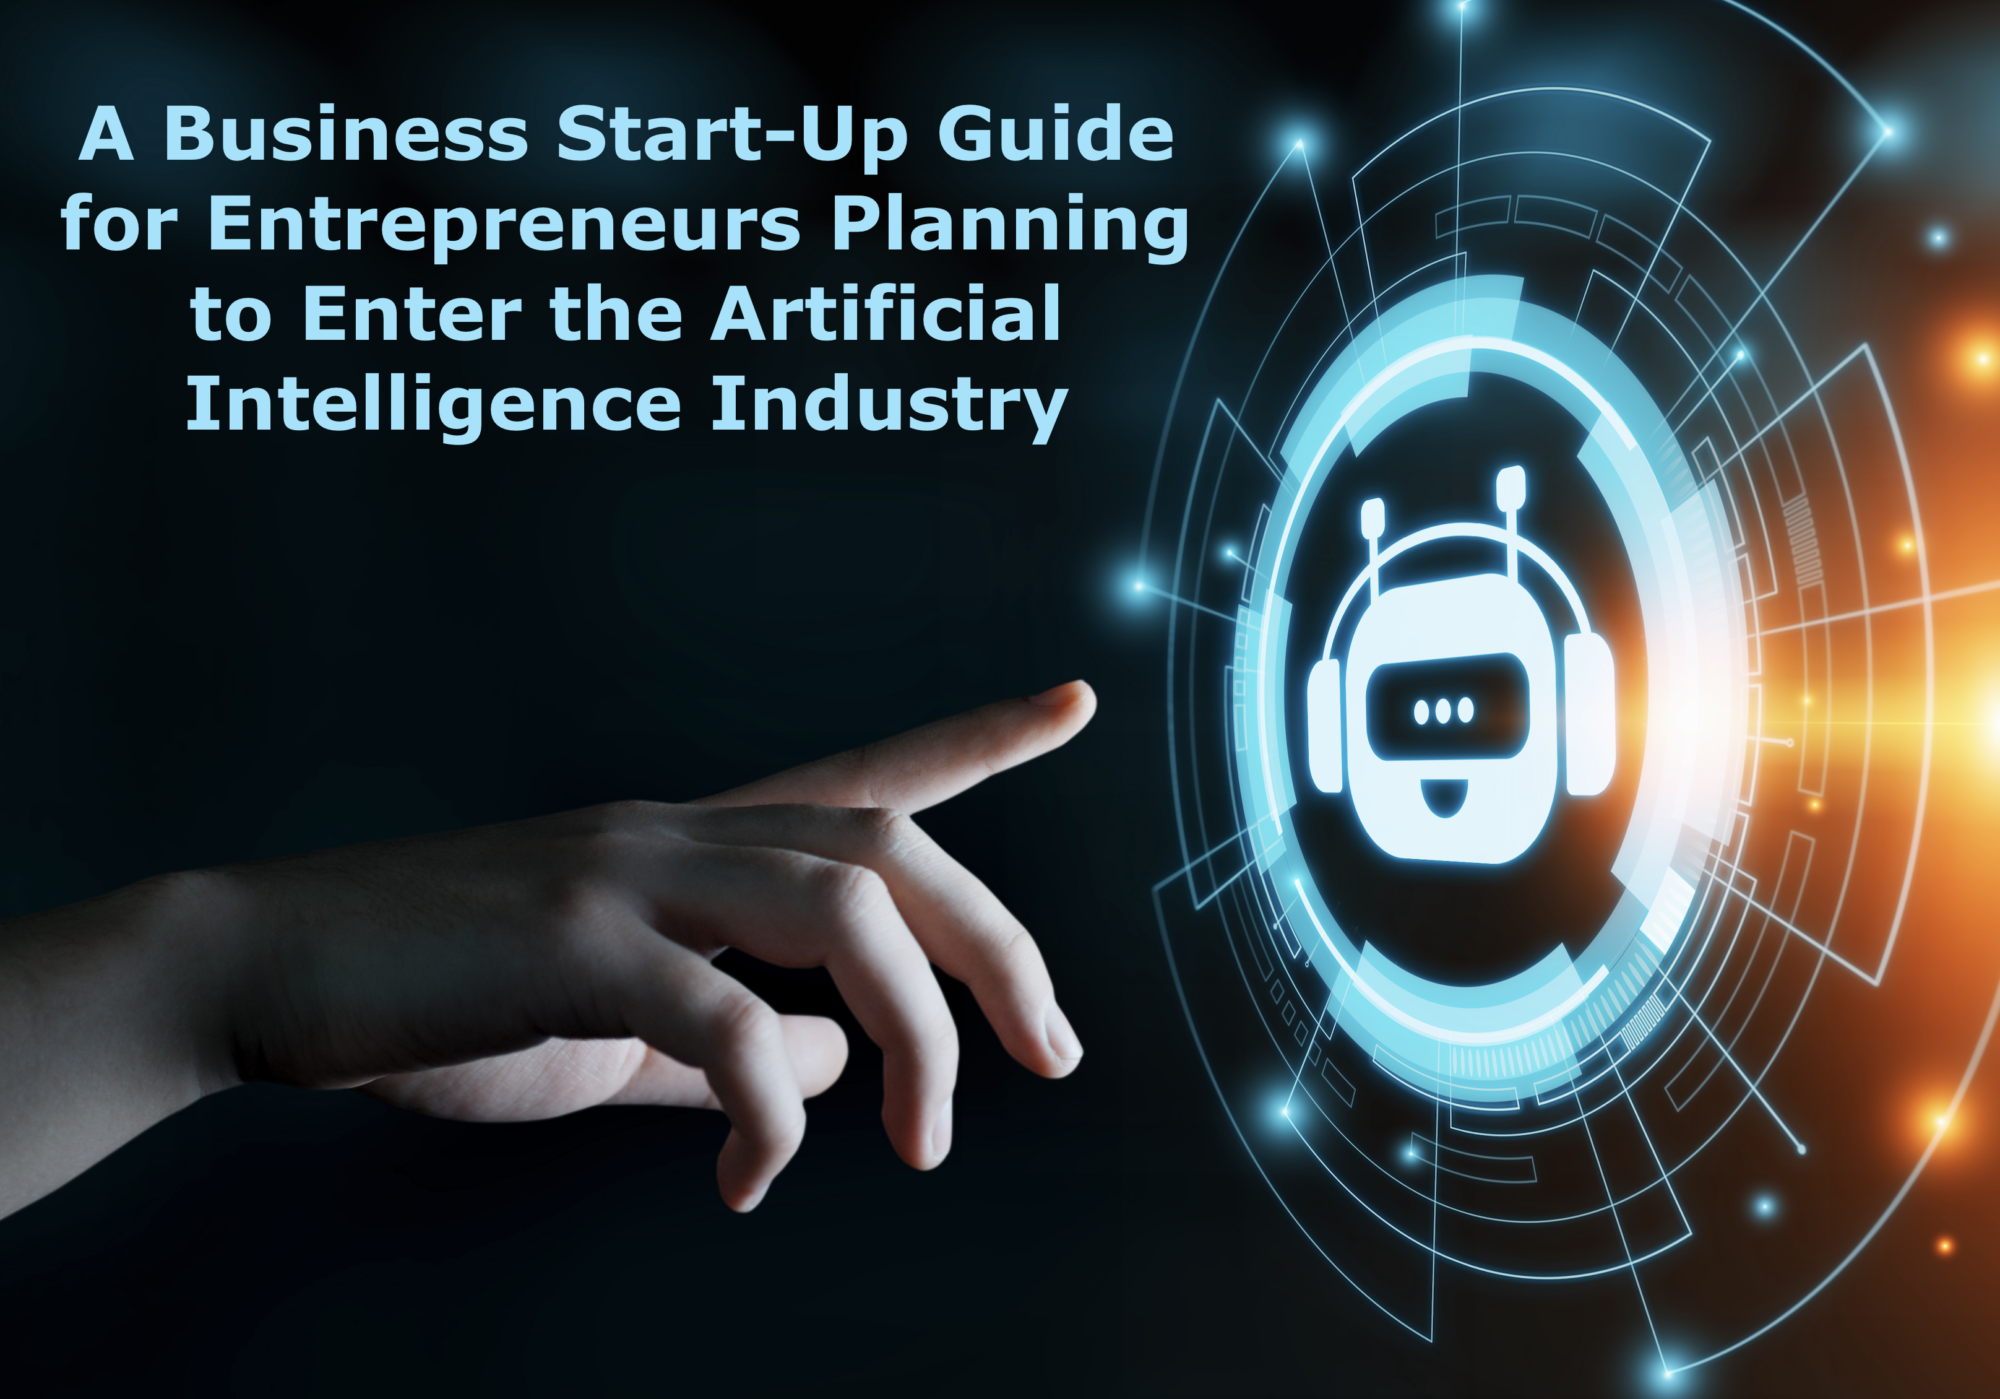 A Business Start-Up Guide for Entrepreneurs Planning to Enter the Artificial Intelligence Industry